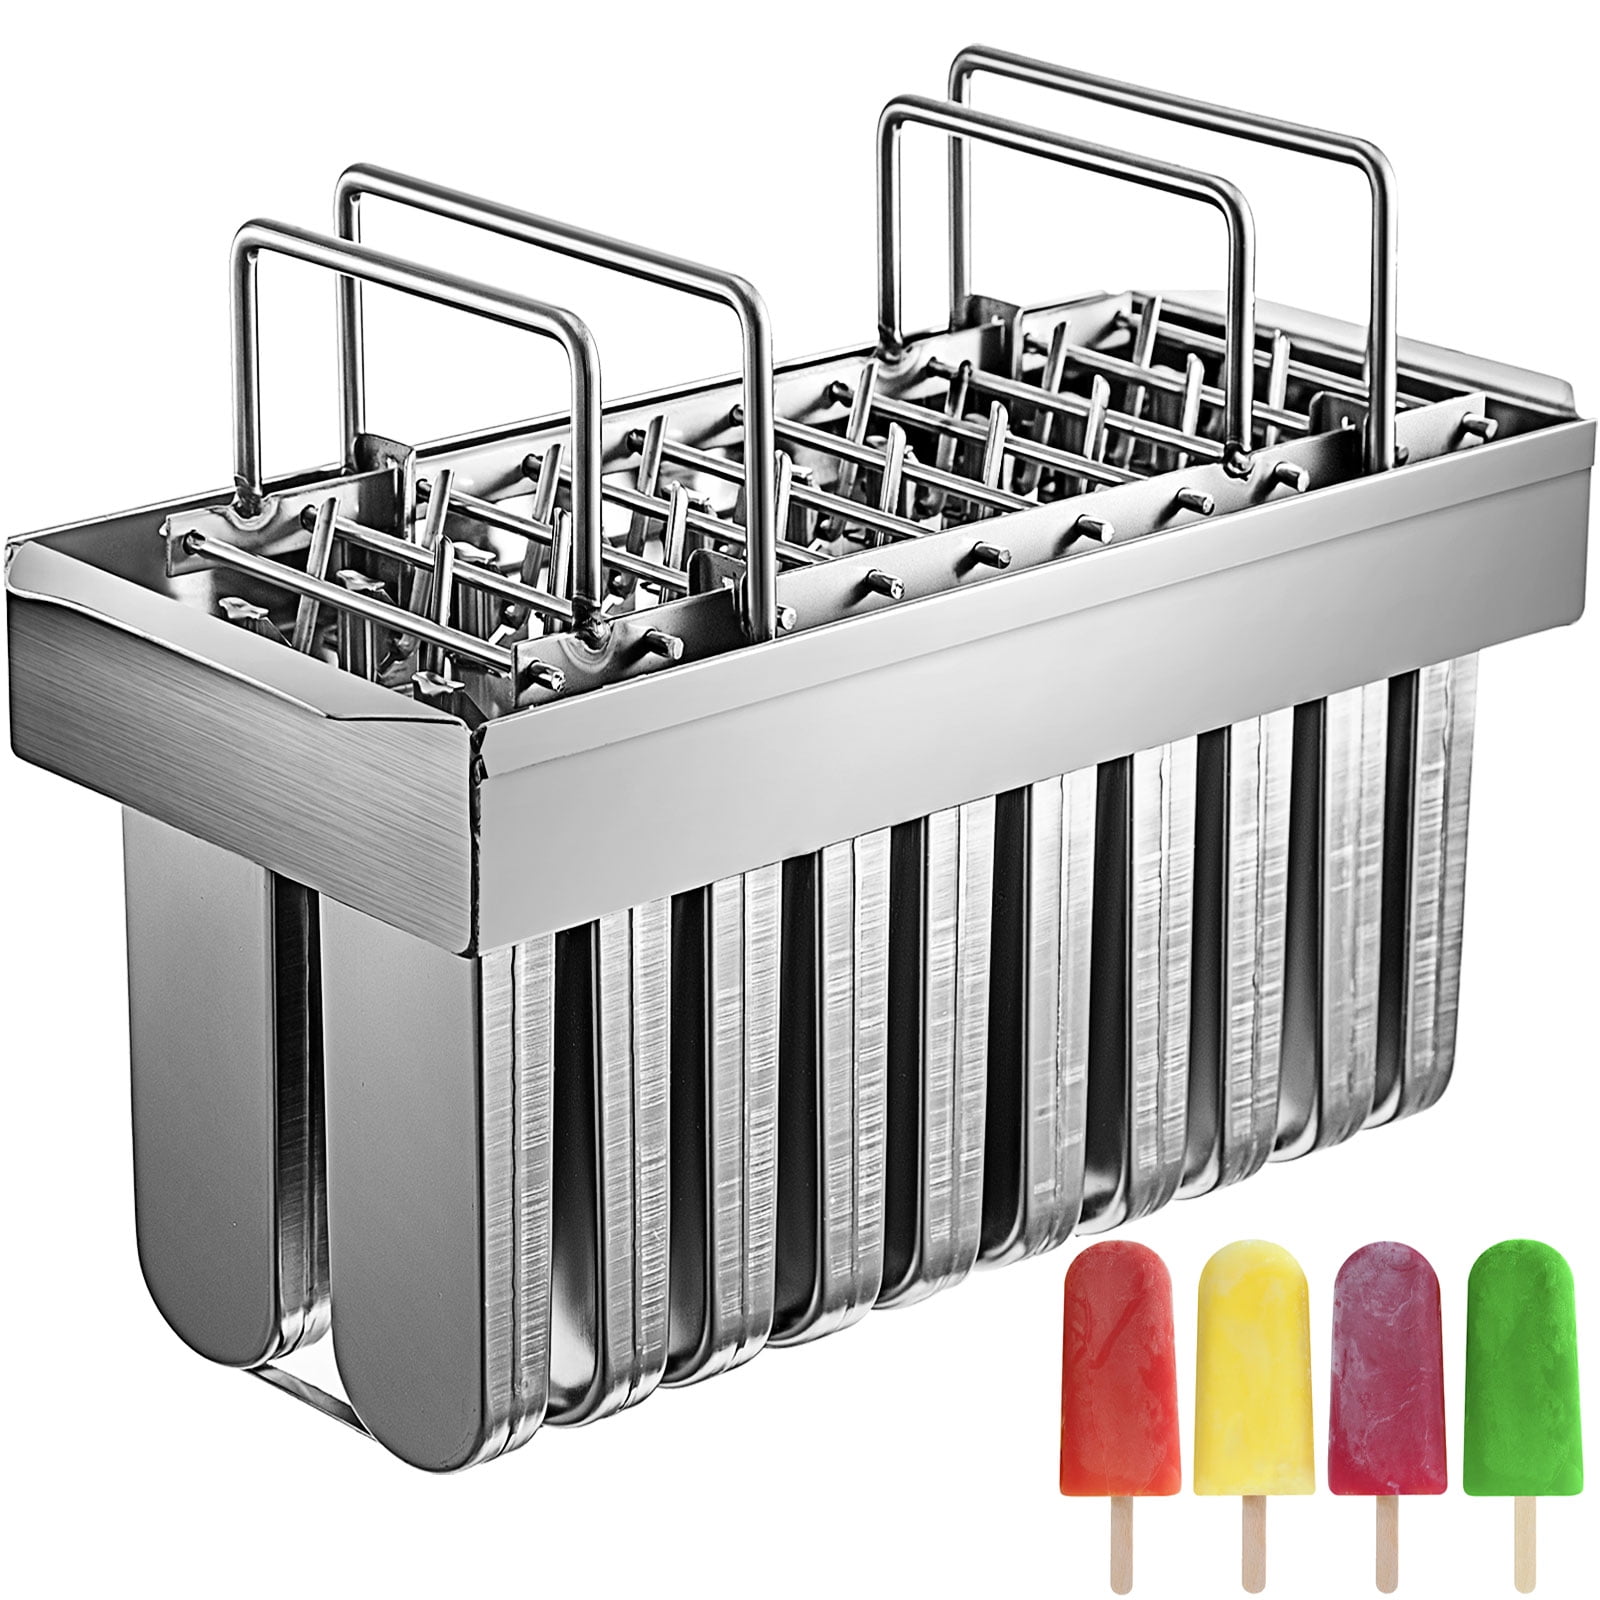 Details about   Stainless Steel Popsicle Molds Ice Lolly Ice Cream Mould with Stick Holder 